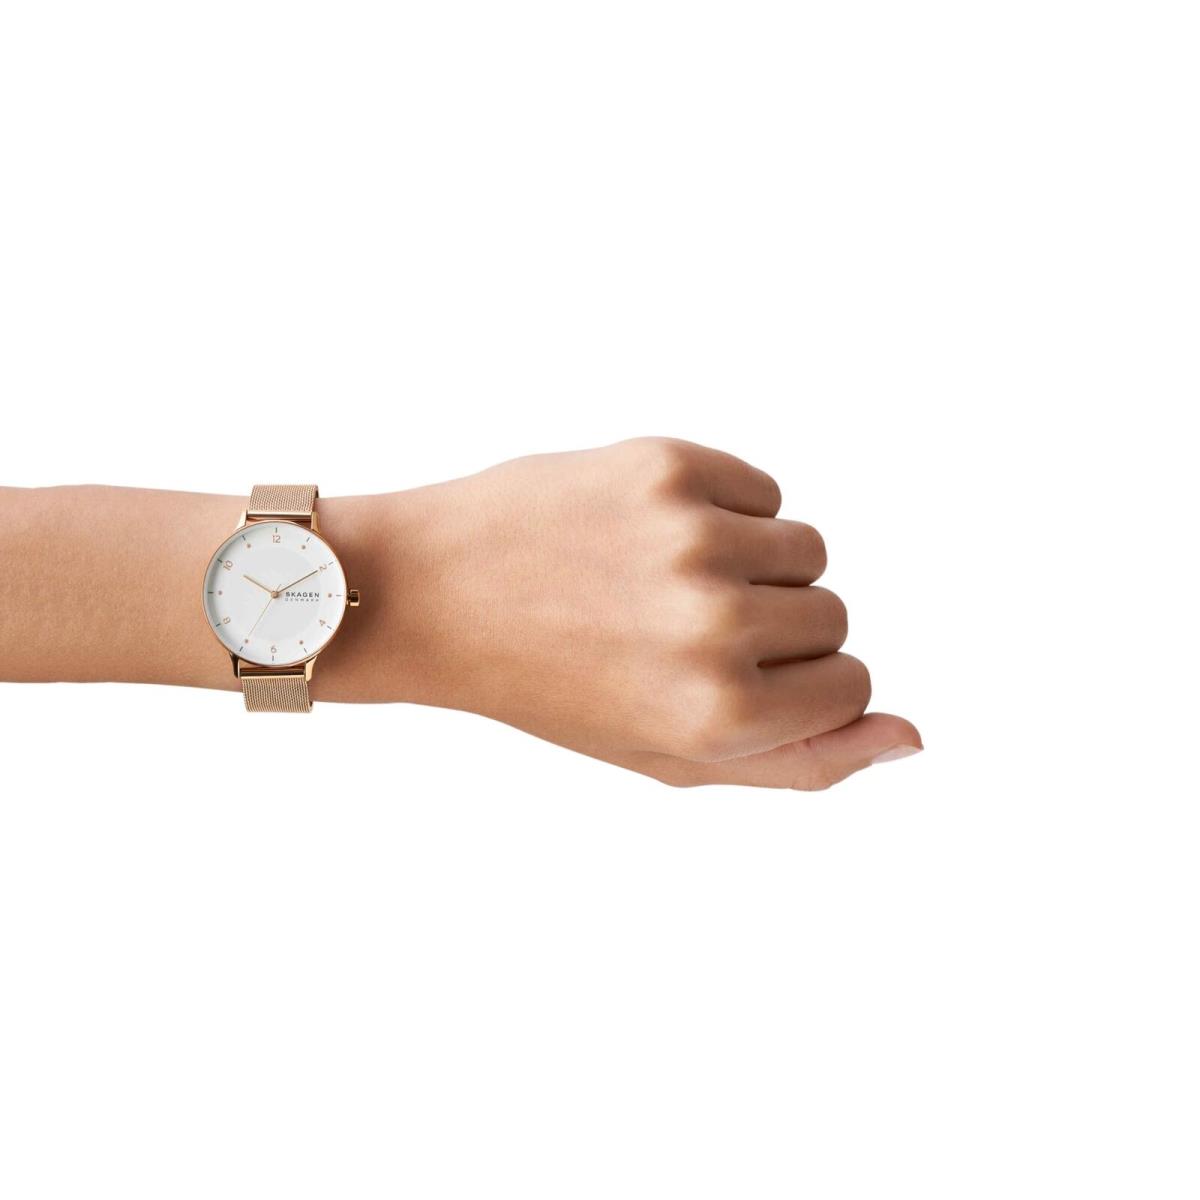 Skagen Kuppel Lille or Riis Lille Minimalist Women`s Watch with Stainless